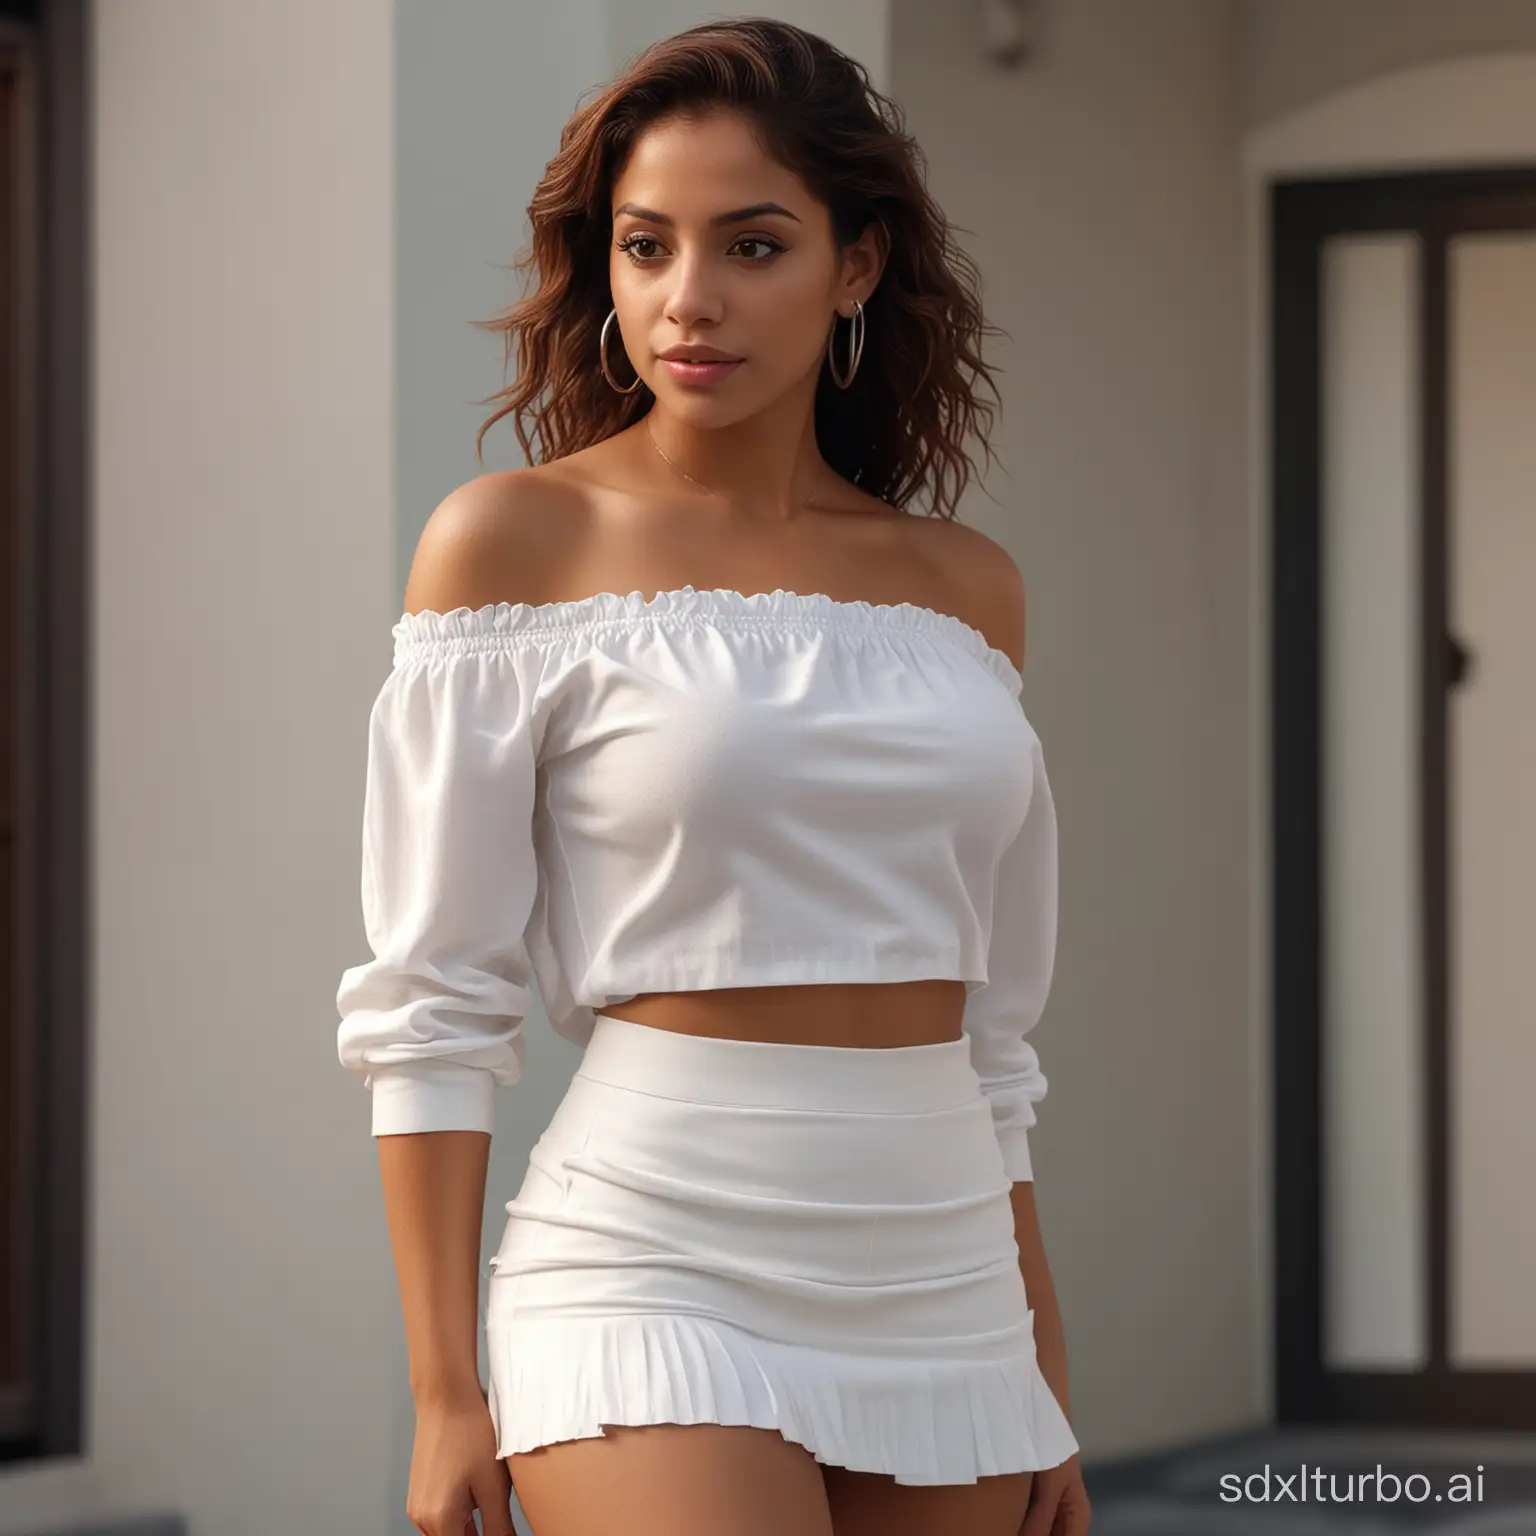 Stylish-Puerto-Rican-Woman-in-Miniskirt-and-OffShoulder-Blouse-Cinematic-4K-Portrait